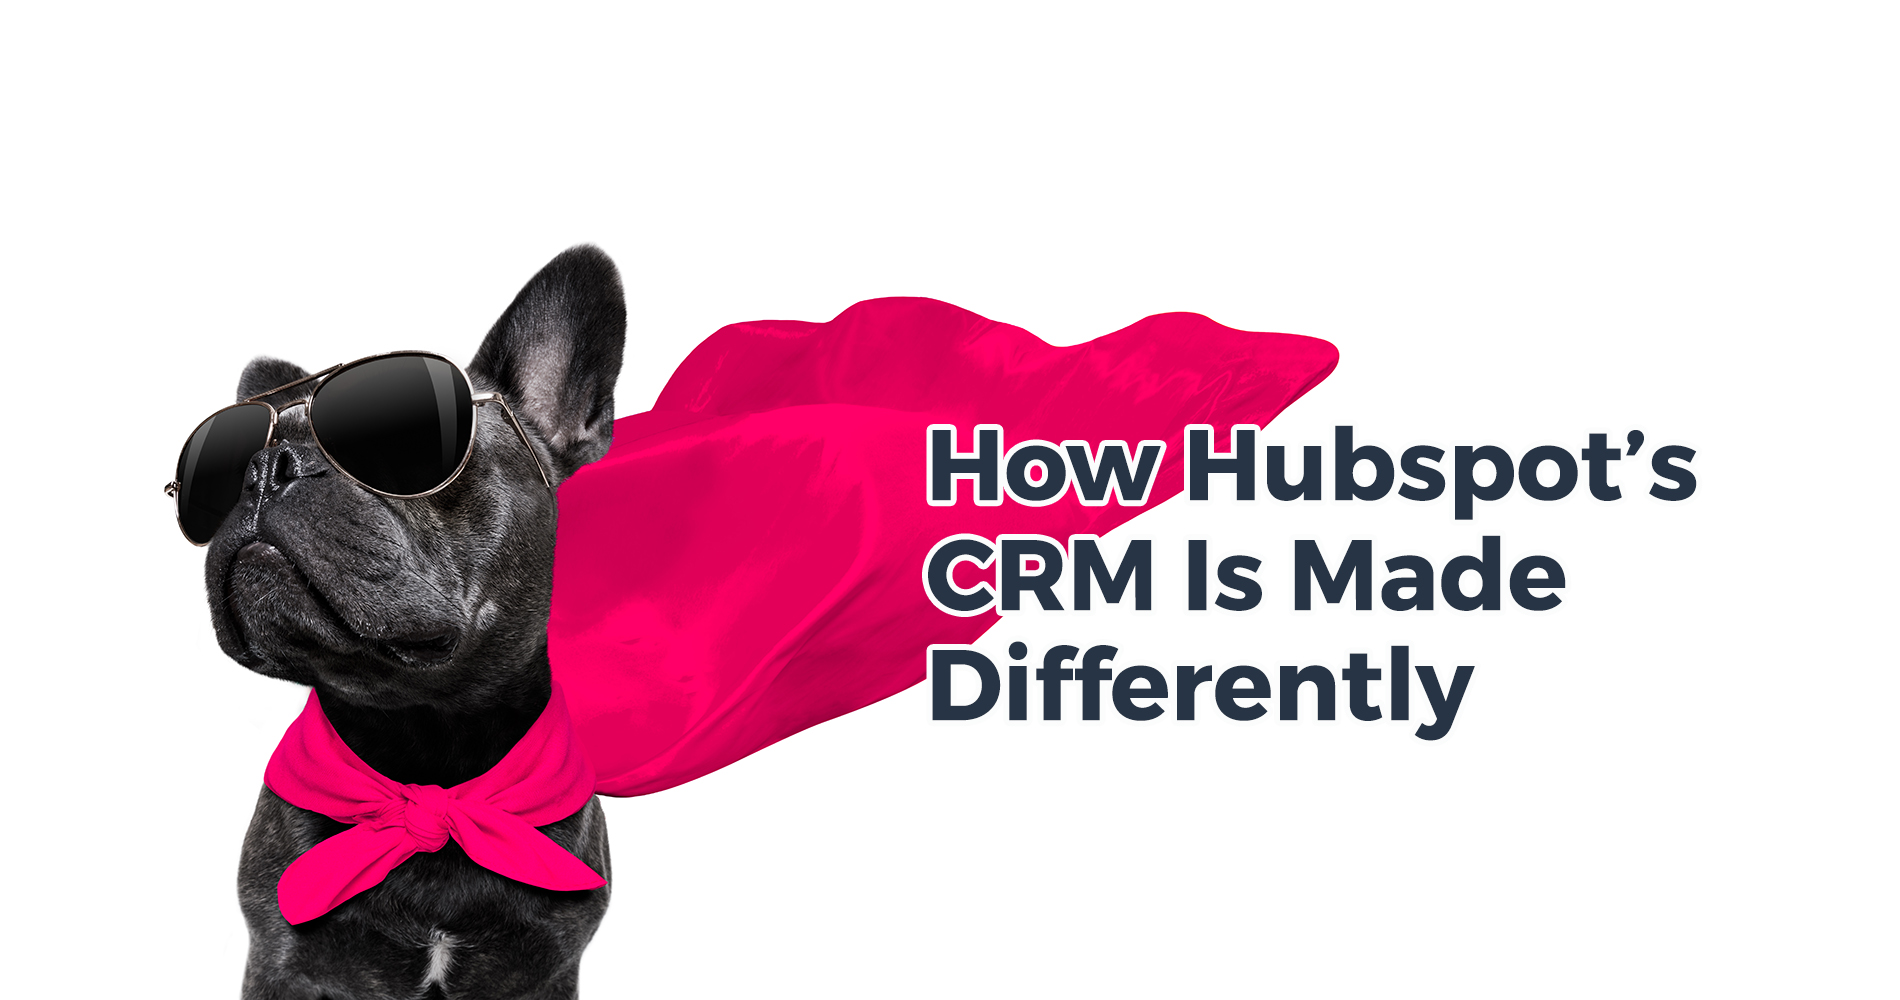 How Hubspot’s CRM Is Made Differently